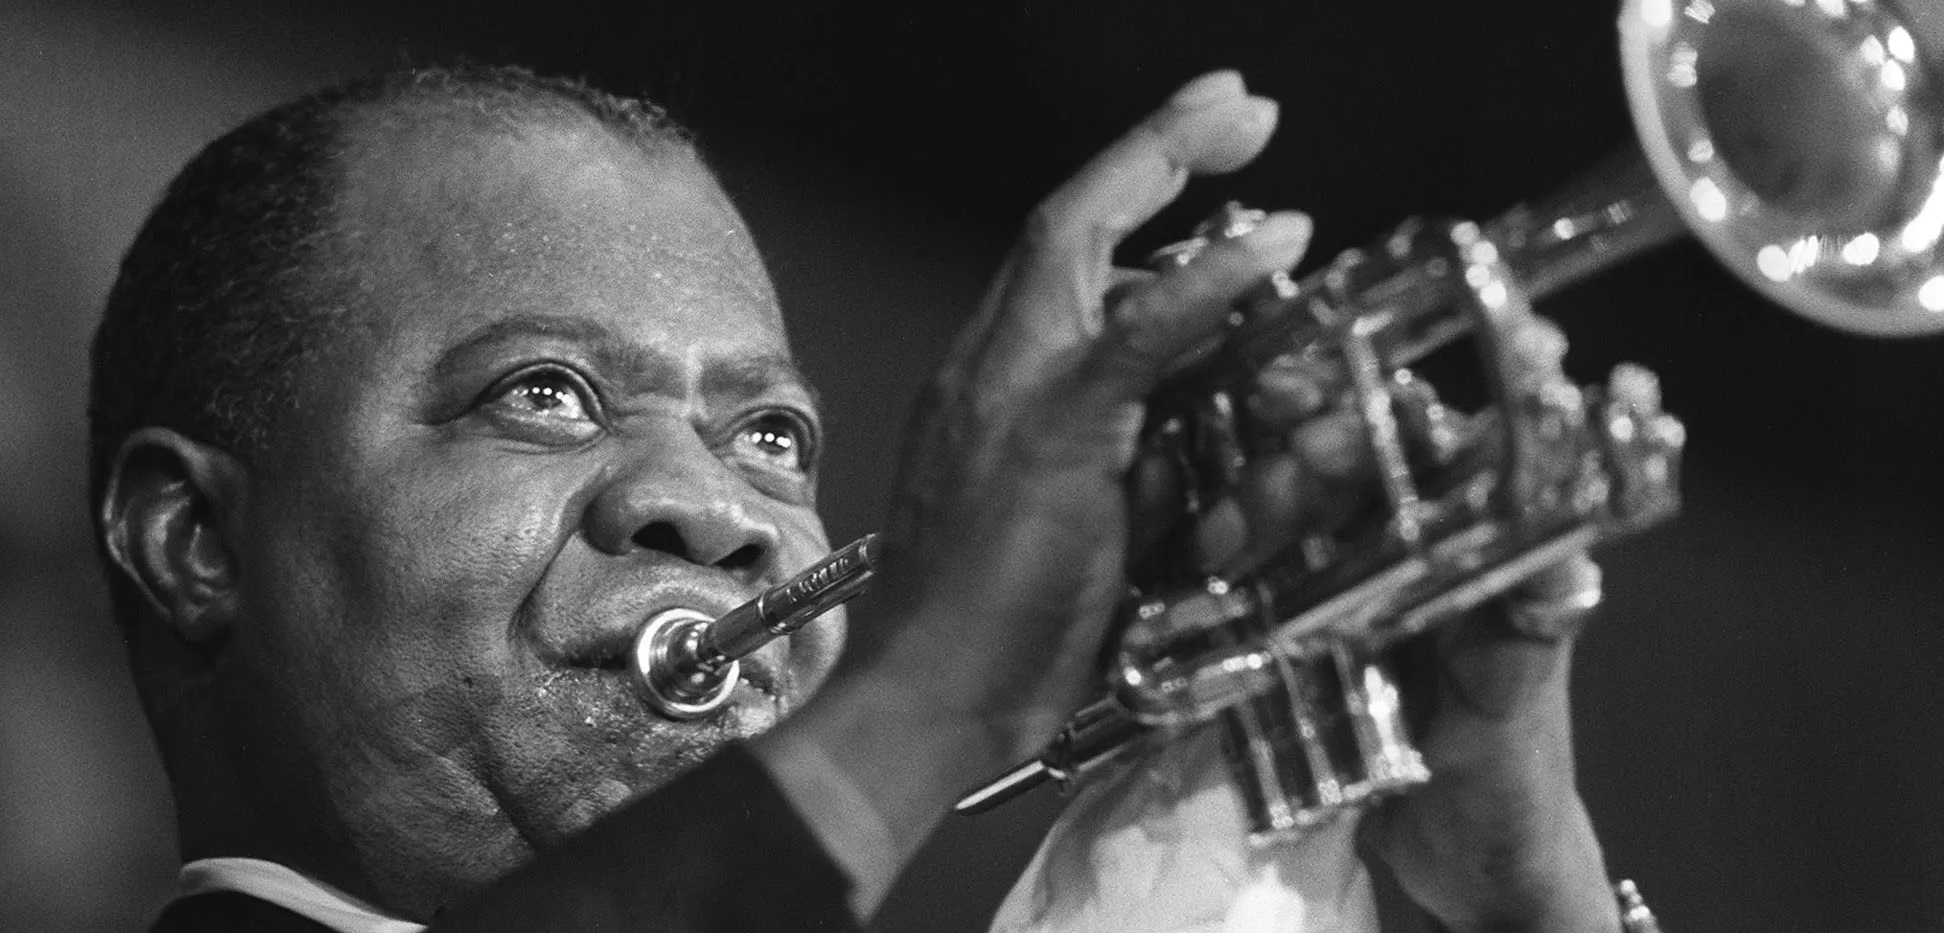 American jazzman Louis Armstrong during a concert in Paris, June 5, 1965. AFP/GETTY IMAGES